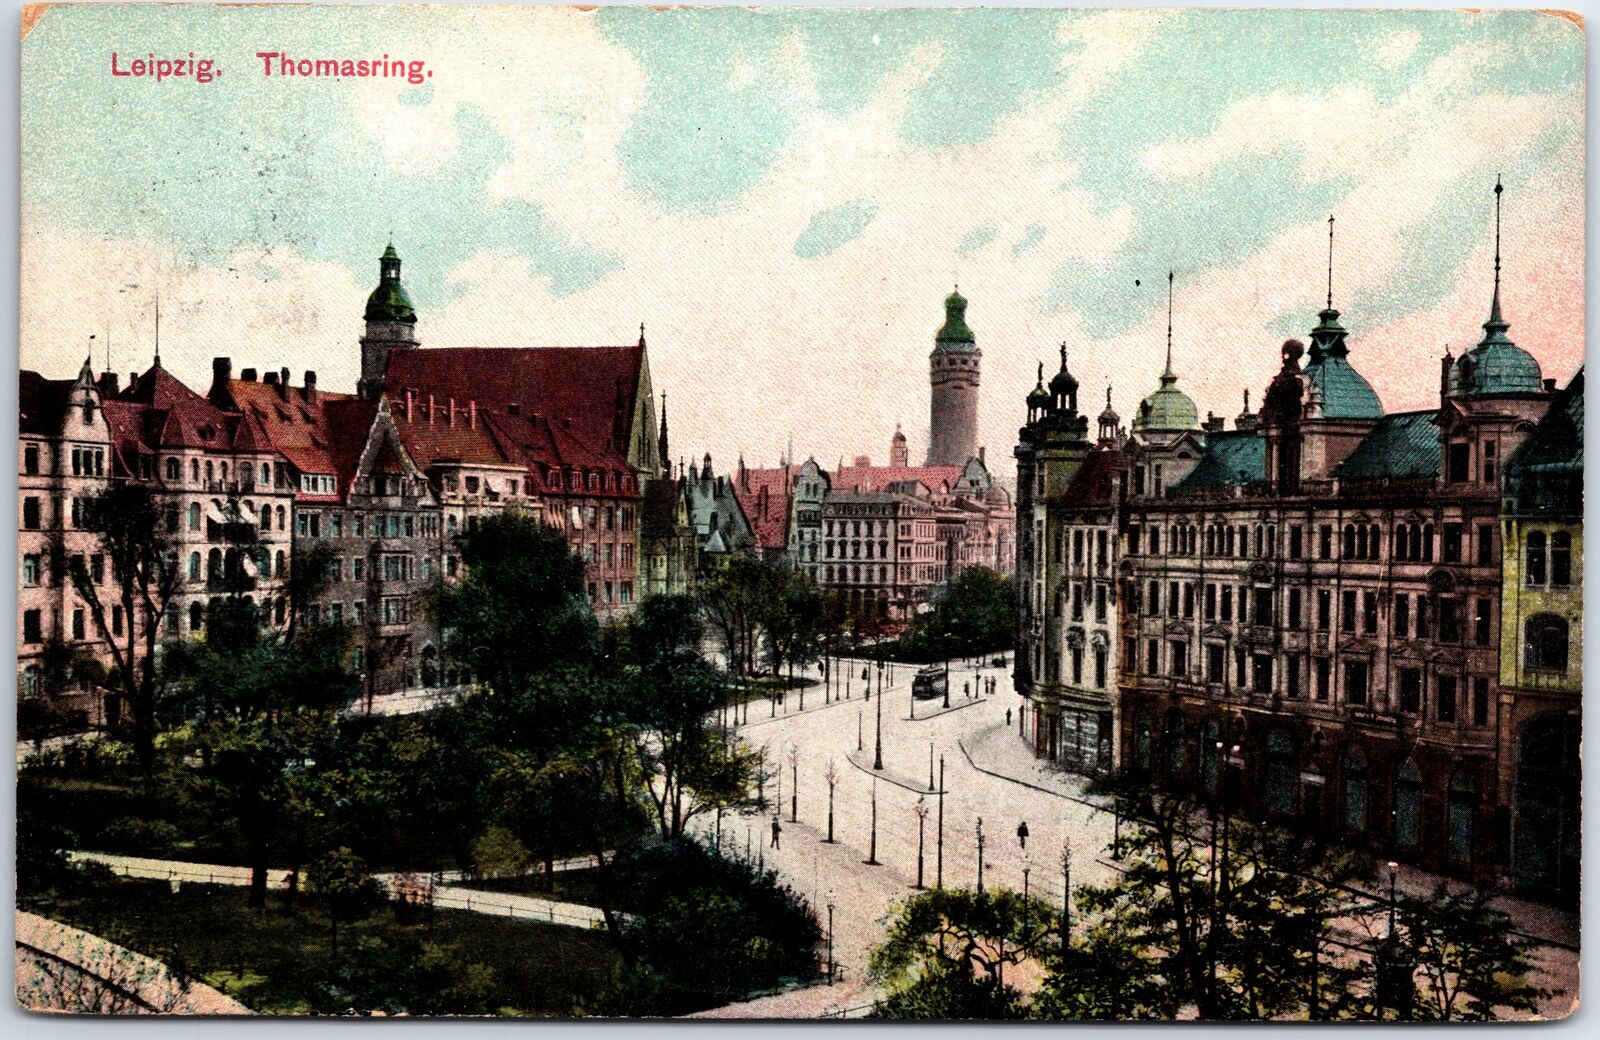 VINTAGE POSTCARD THOMASRING SECTION OF LEIPZIG AND STREET TROLLEY GERMANY c 1910